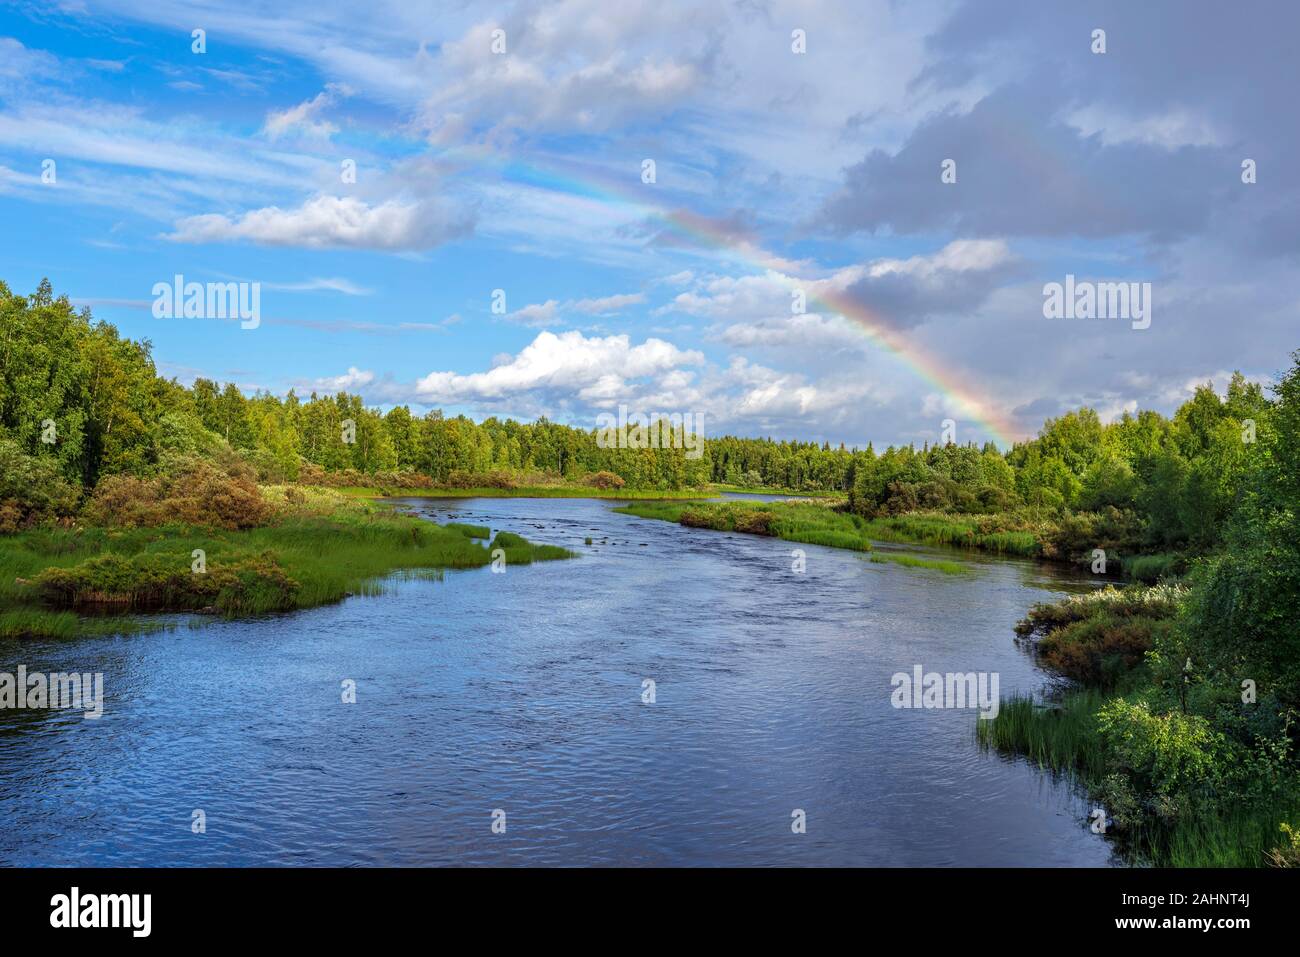 The flow of Kasmanjoki river bordered by pin forests in Finnish Lapland. The sky with rainbow is at background. Picture is taken from E63 Kuusamo road Stock Photo